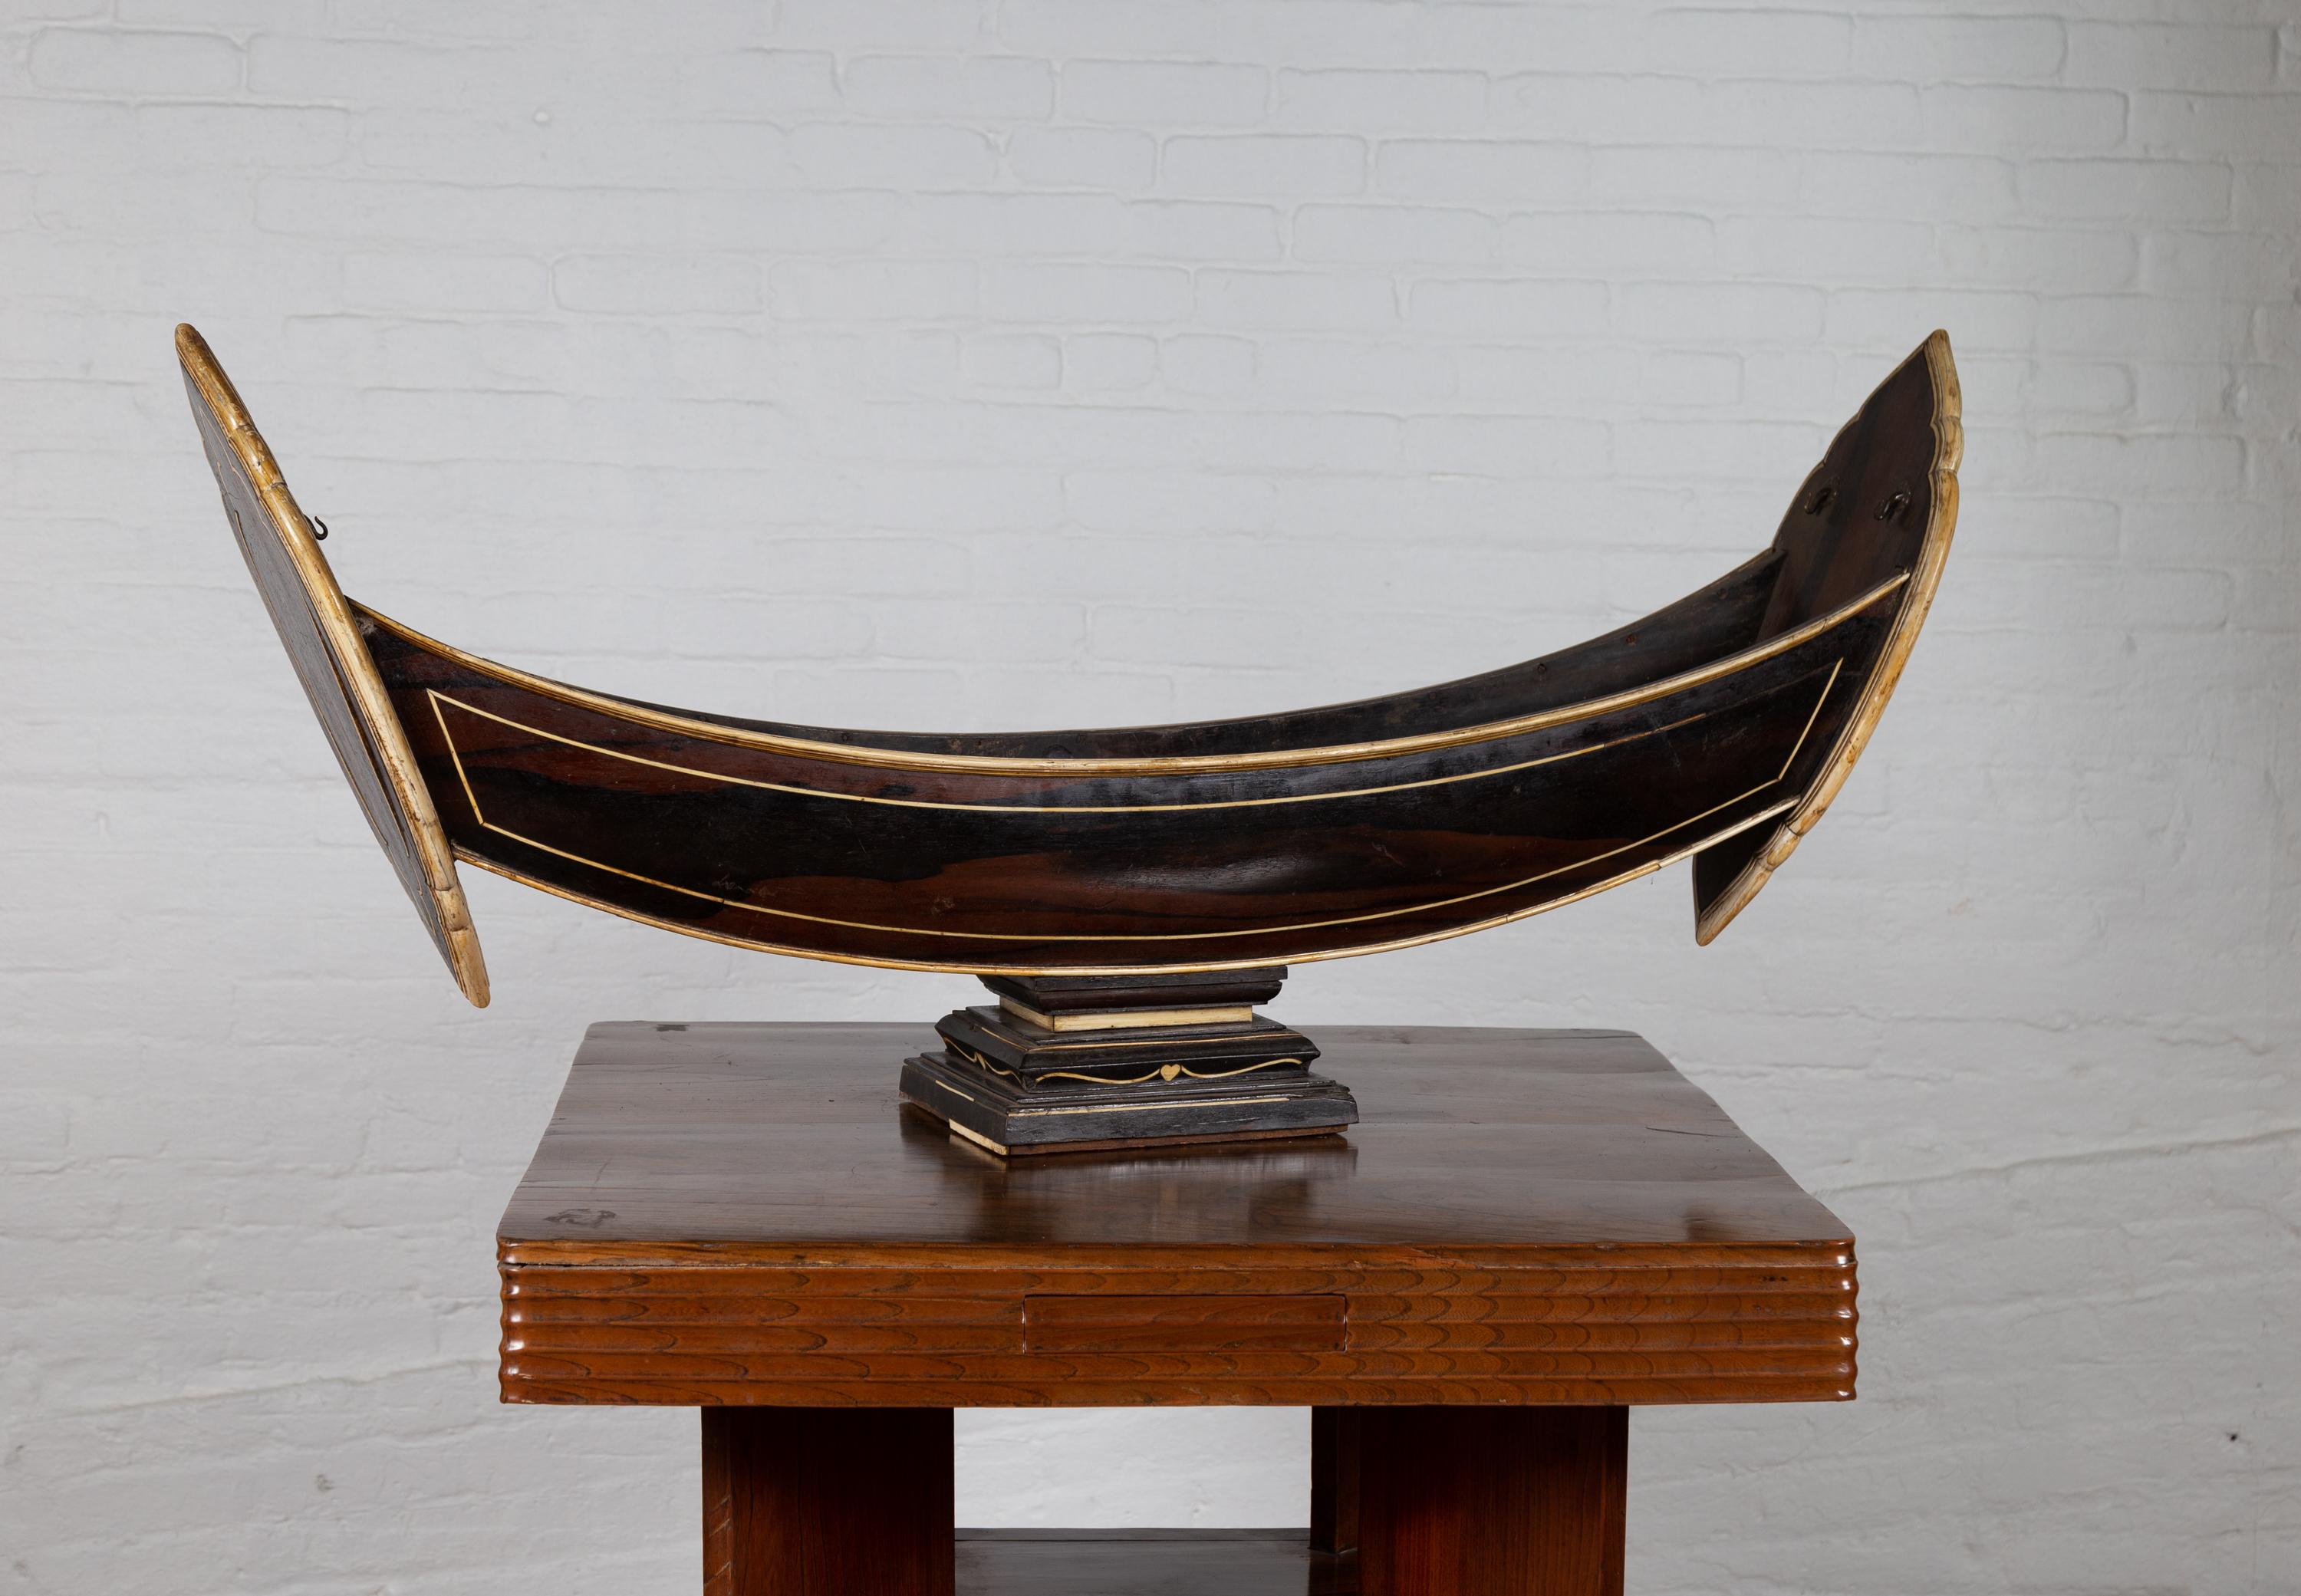 Antique Indonesian Handmade Boat Model on Pedestal with Bone Inlay over Wood For Sale 1